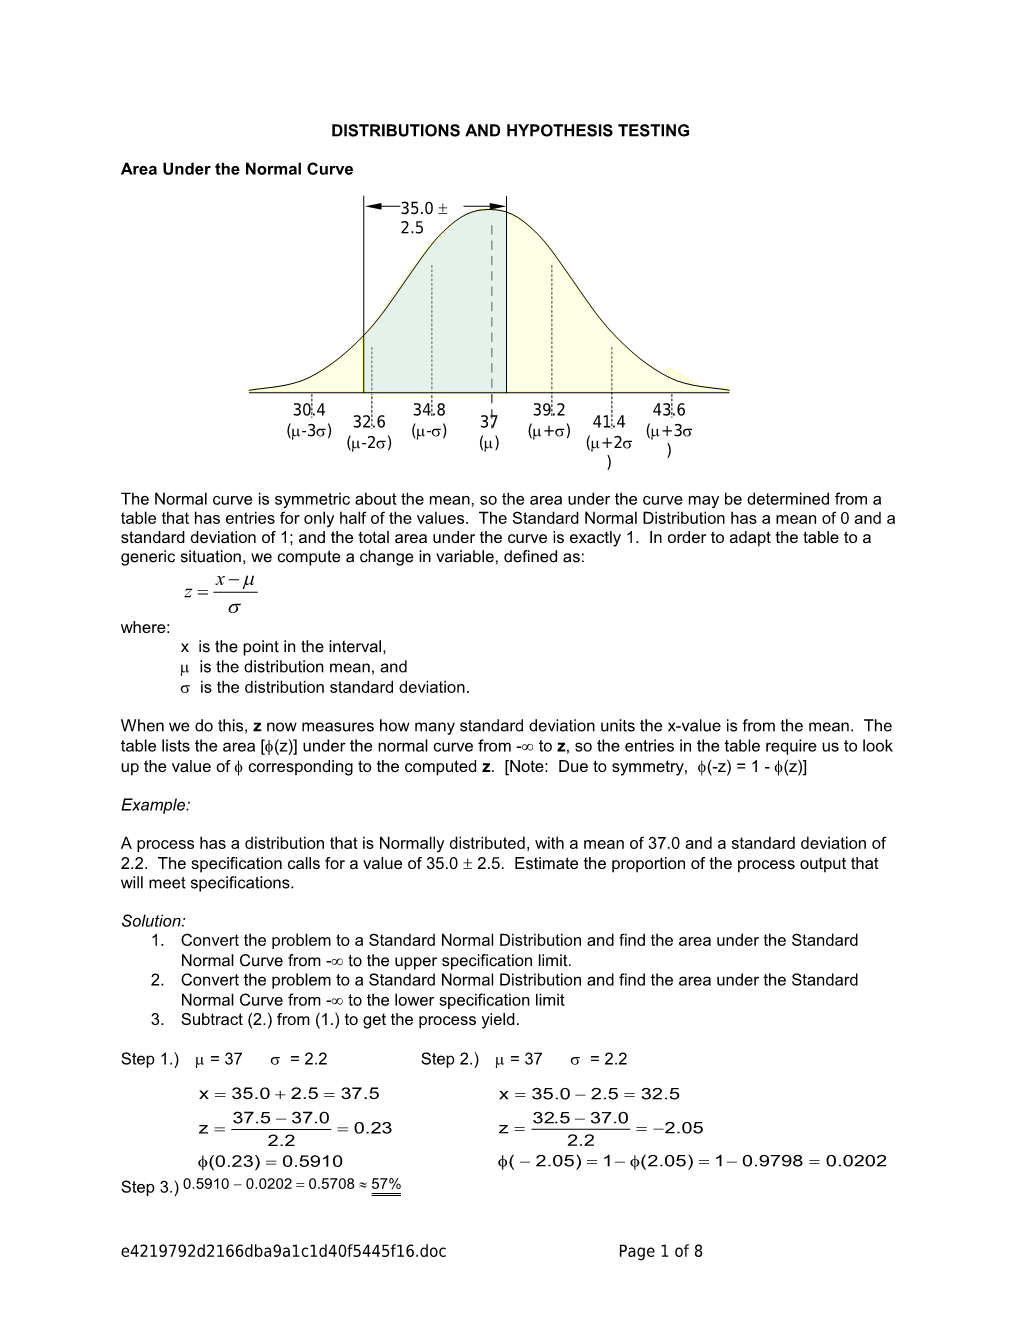 Distributions and Hypothesis Testing